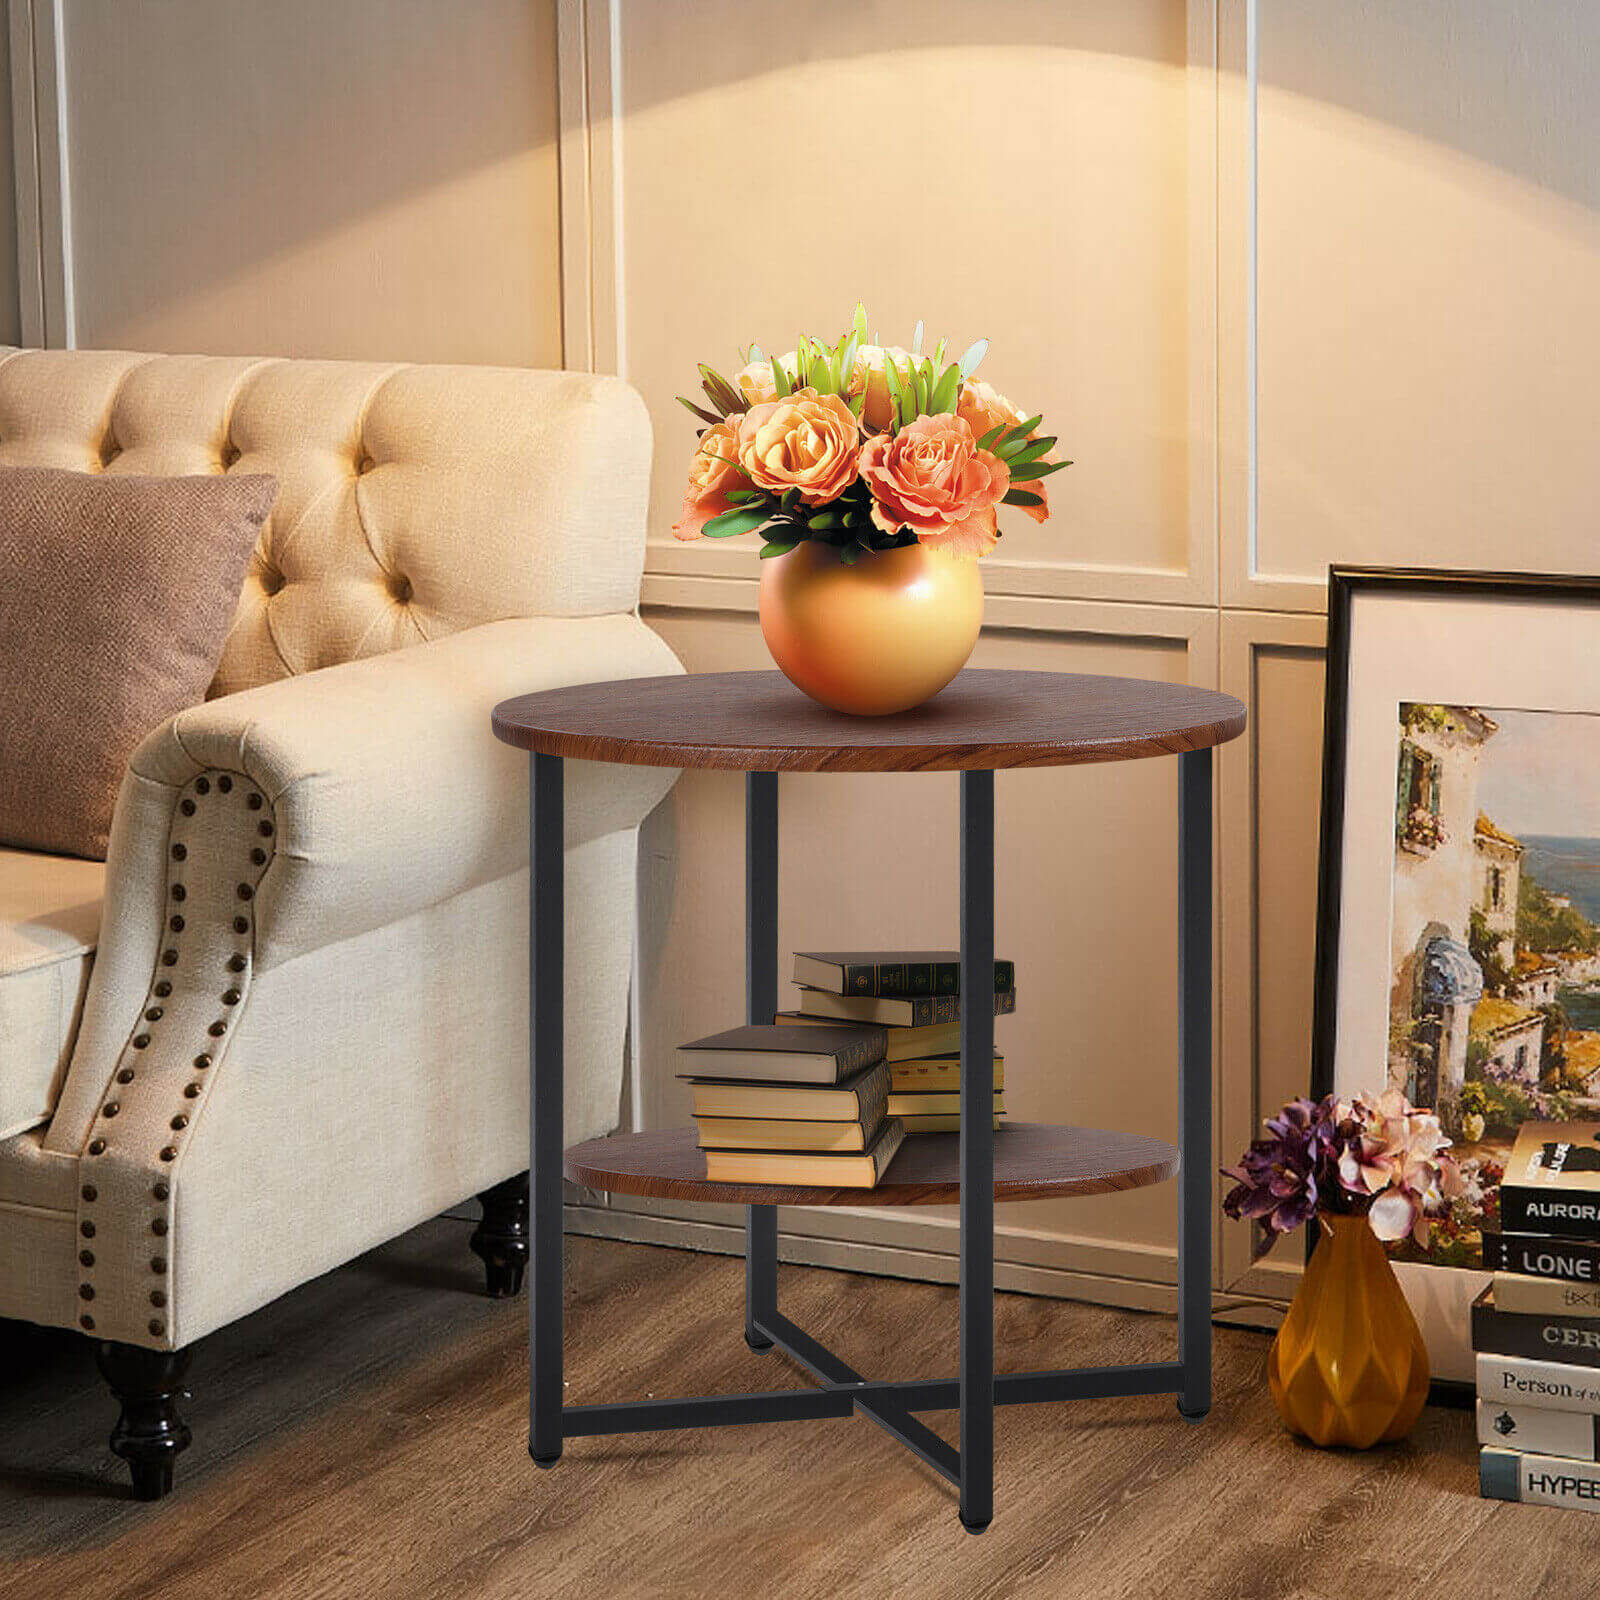 display of Double Tiers End Table